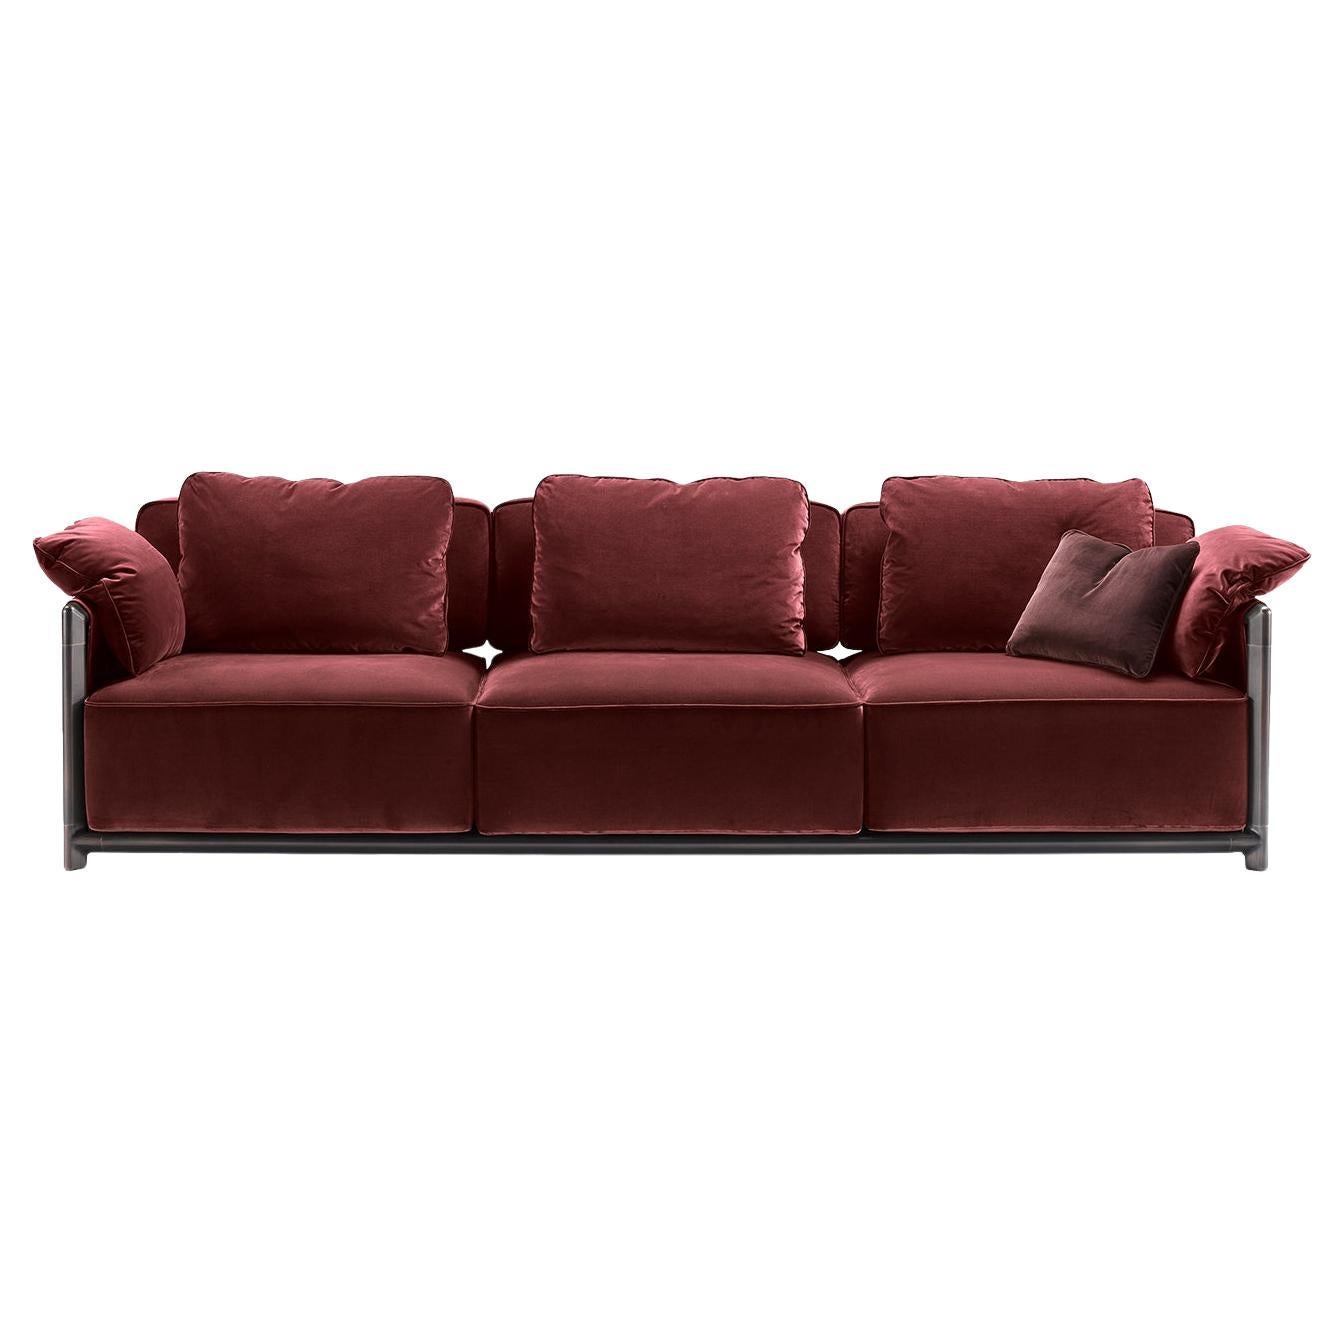 What color walls go with burgundy sofa?